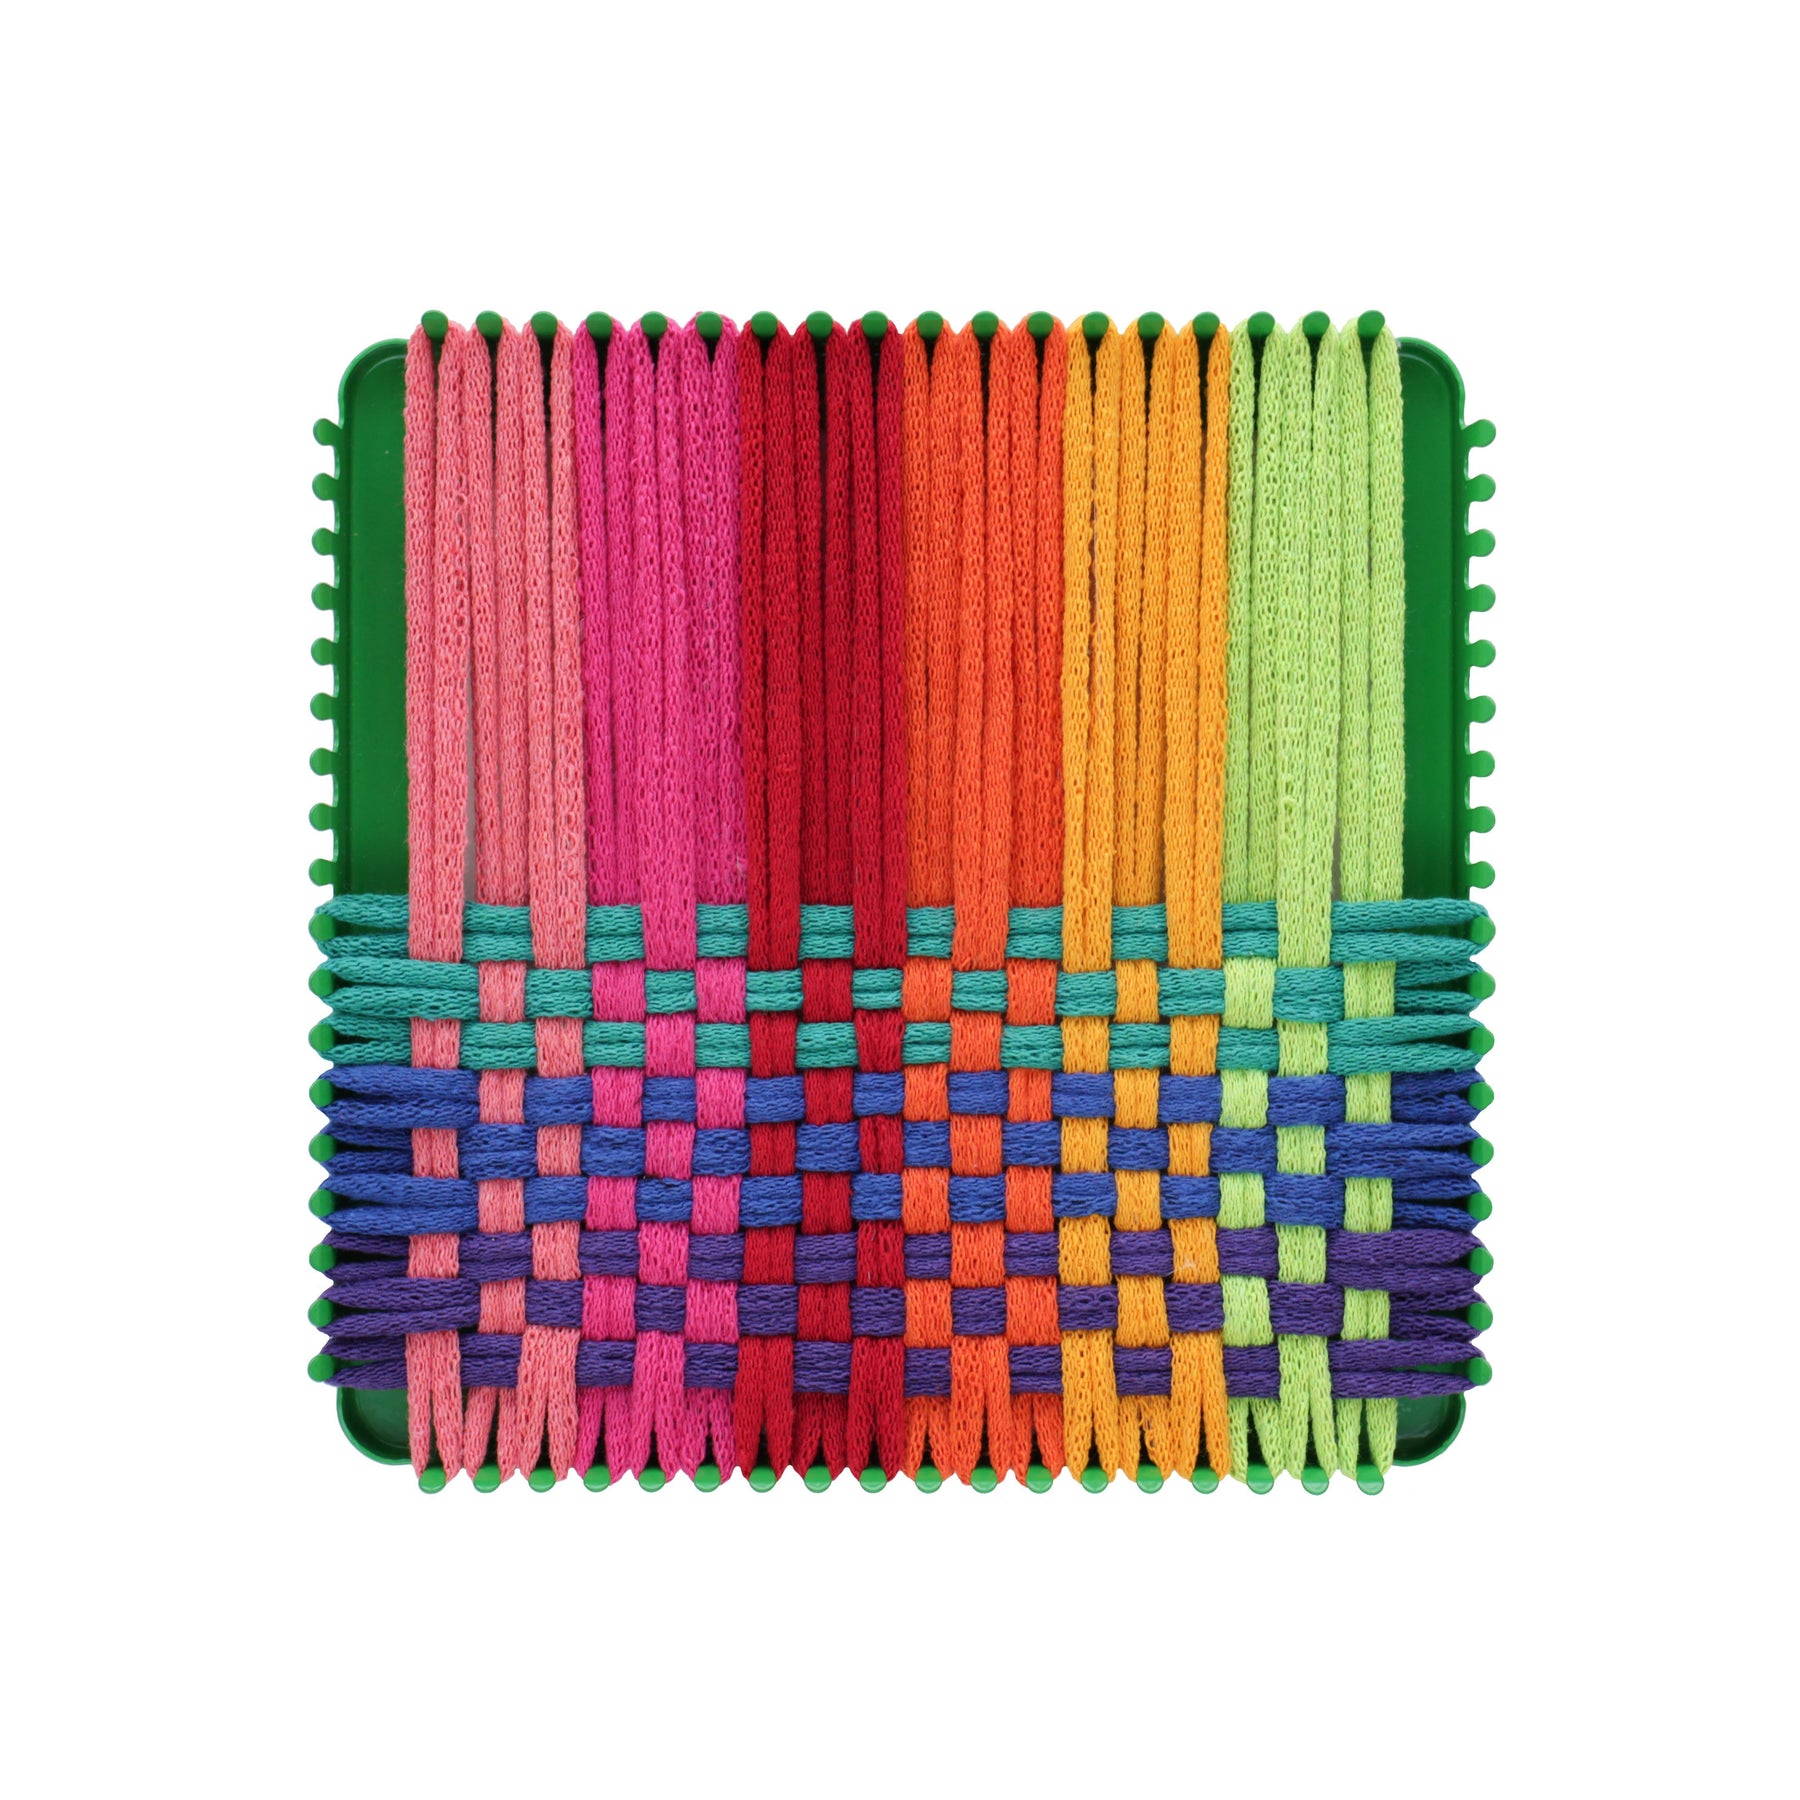 Potholder Loom Deluxe Kit - Traditional Size - Friendly Loom by Harrisville  Designs